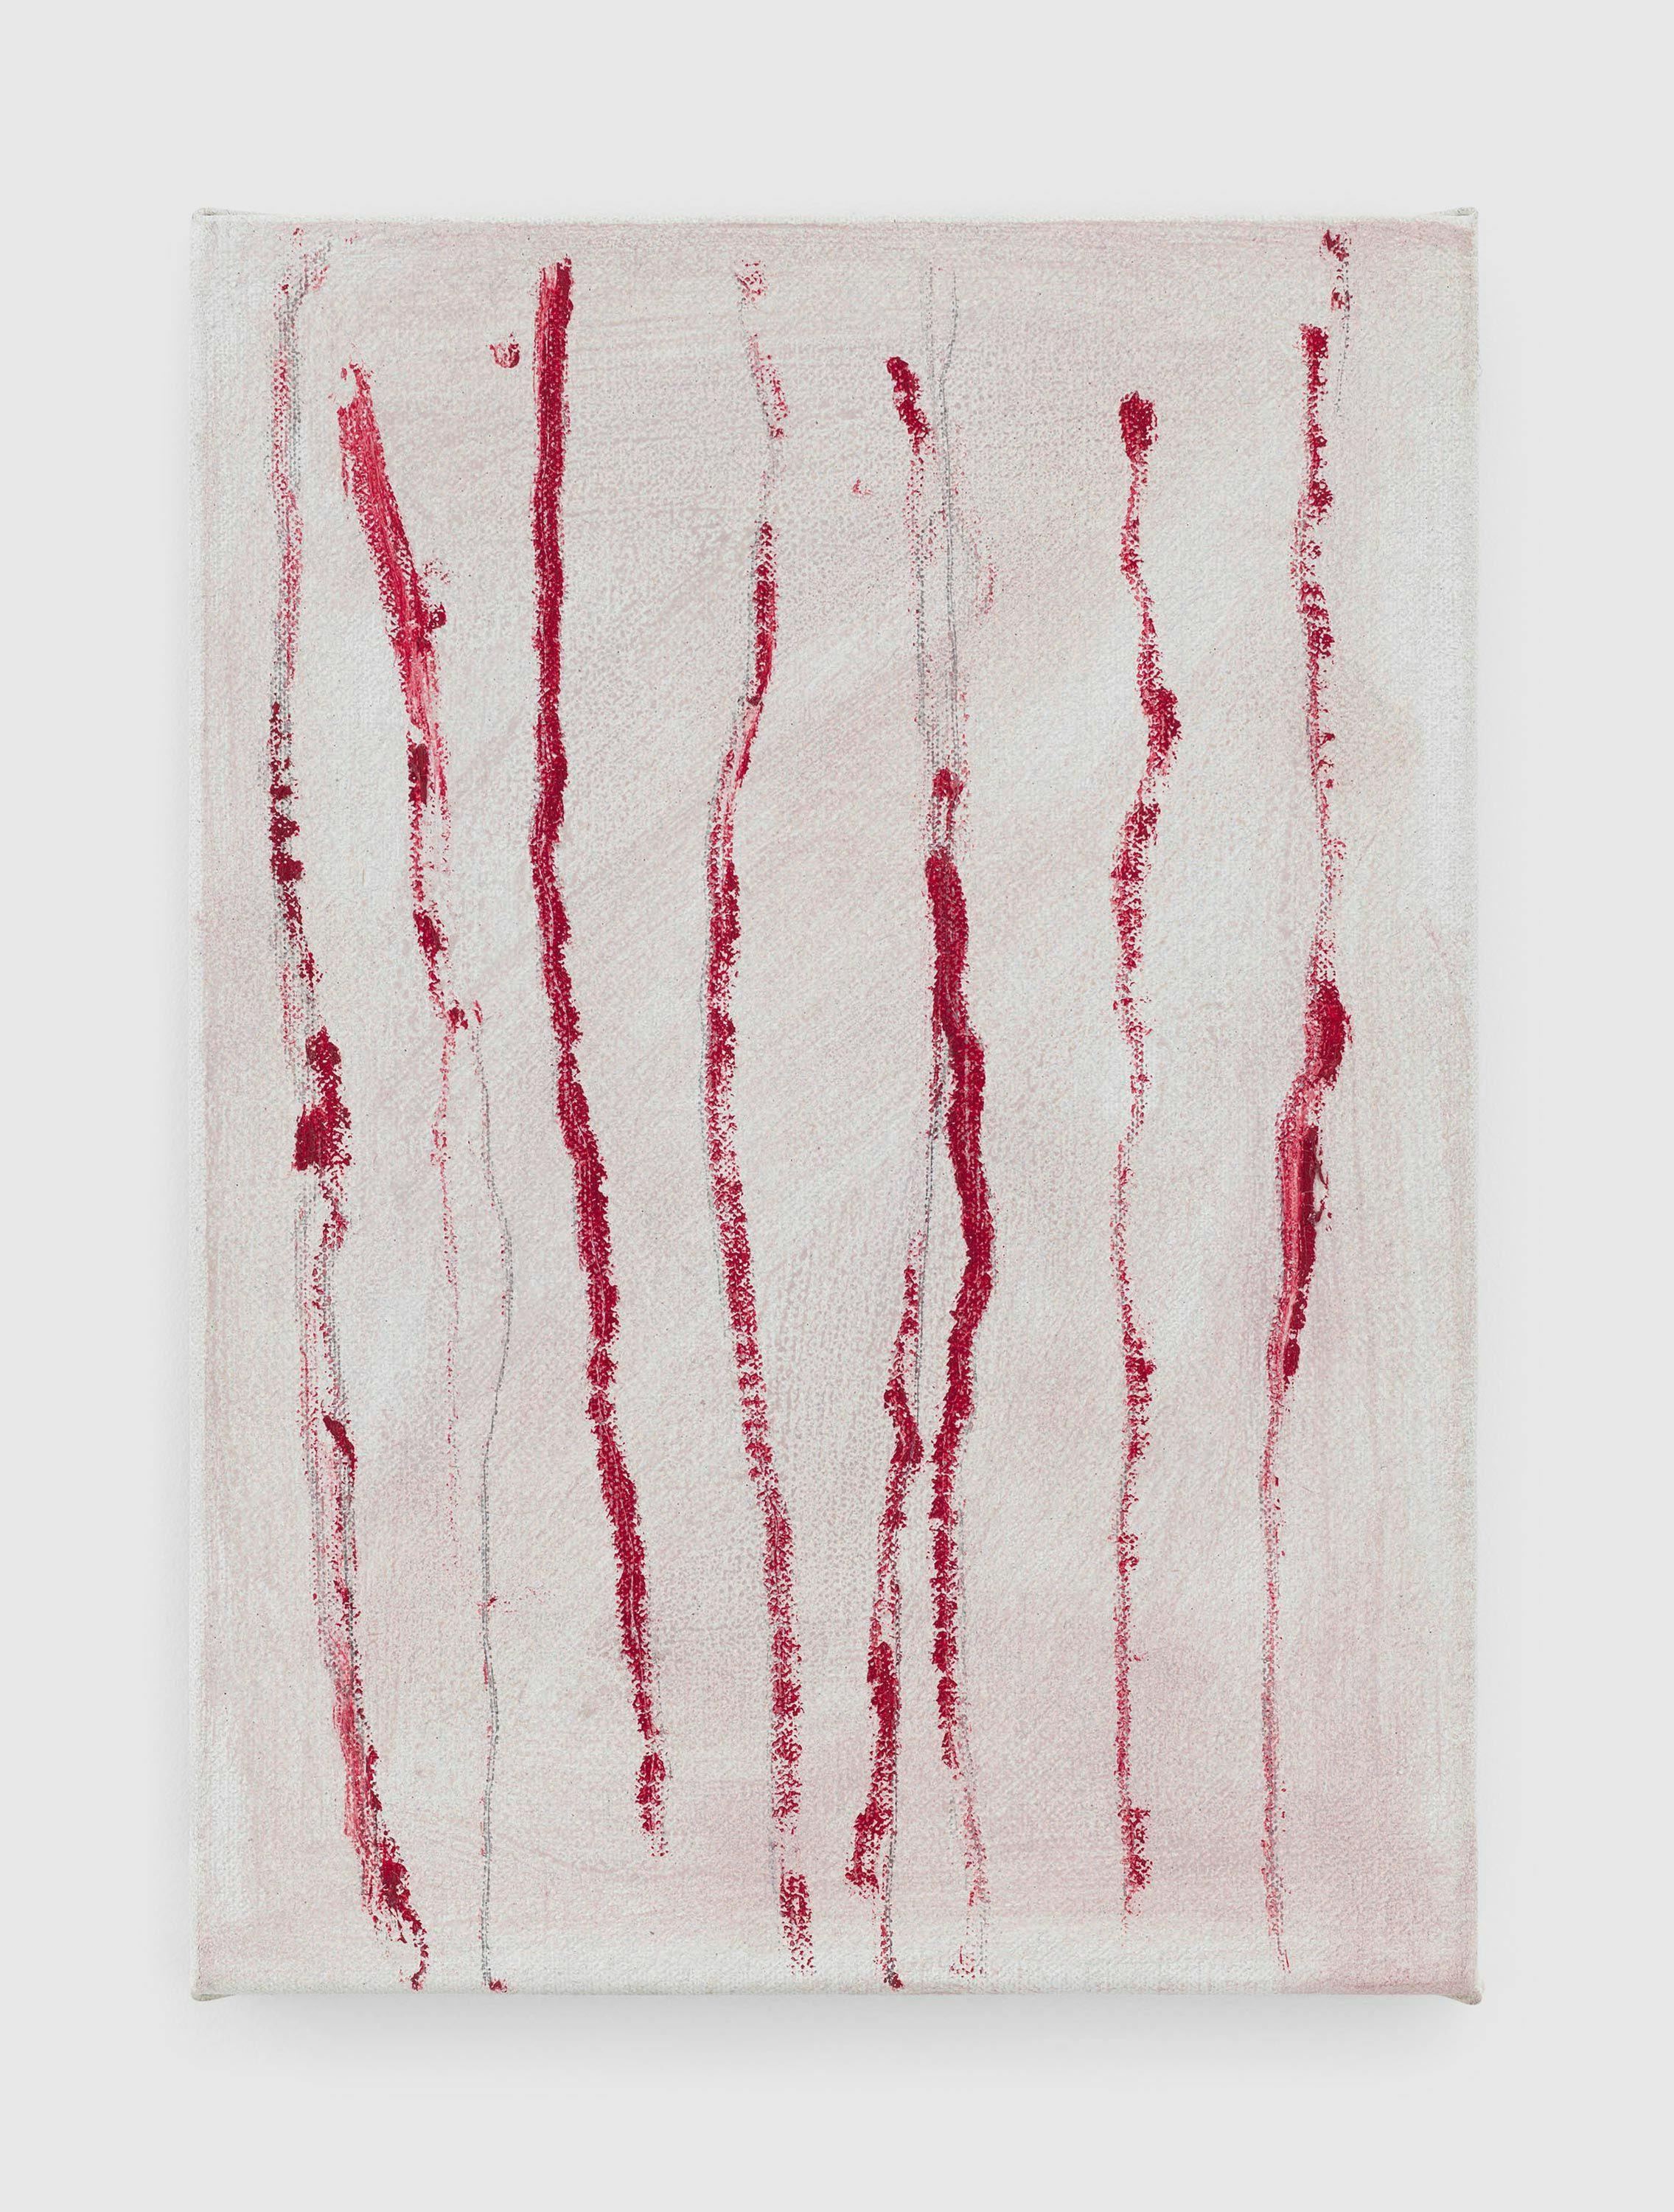 A painting by Raoul De Keyser, titled No Title (8 Verticals/6), dated 2010.